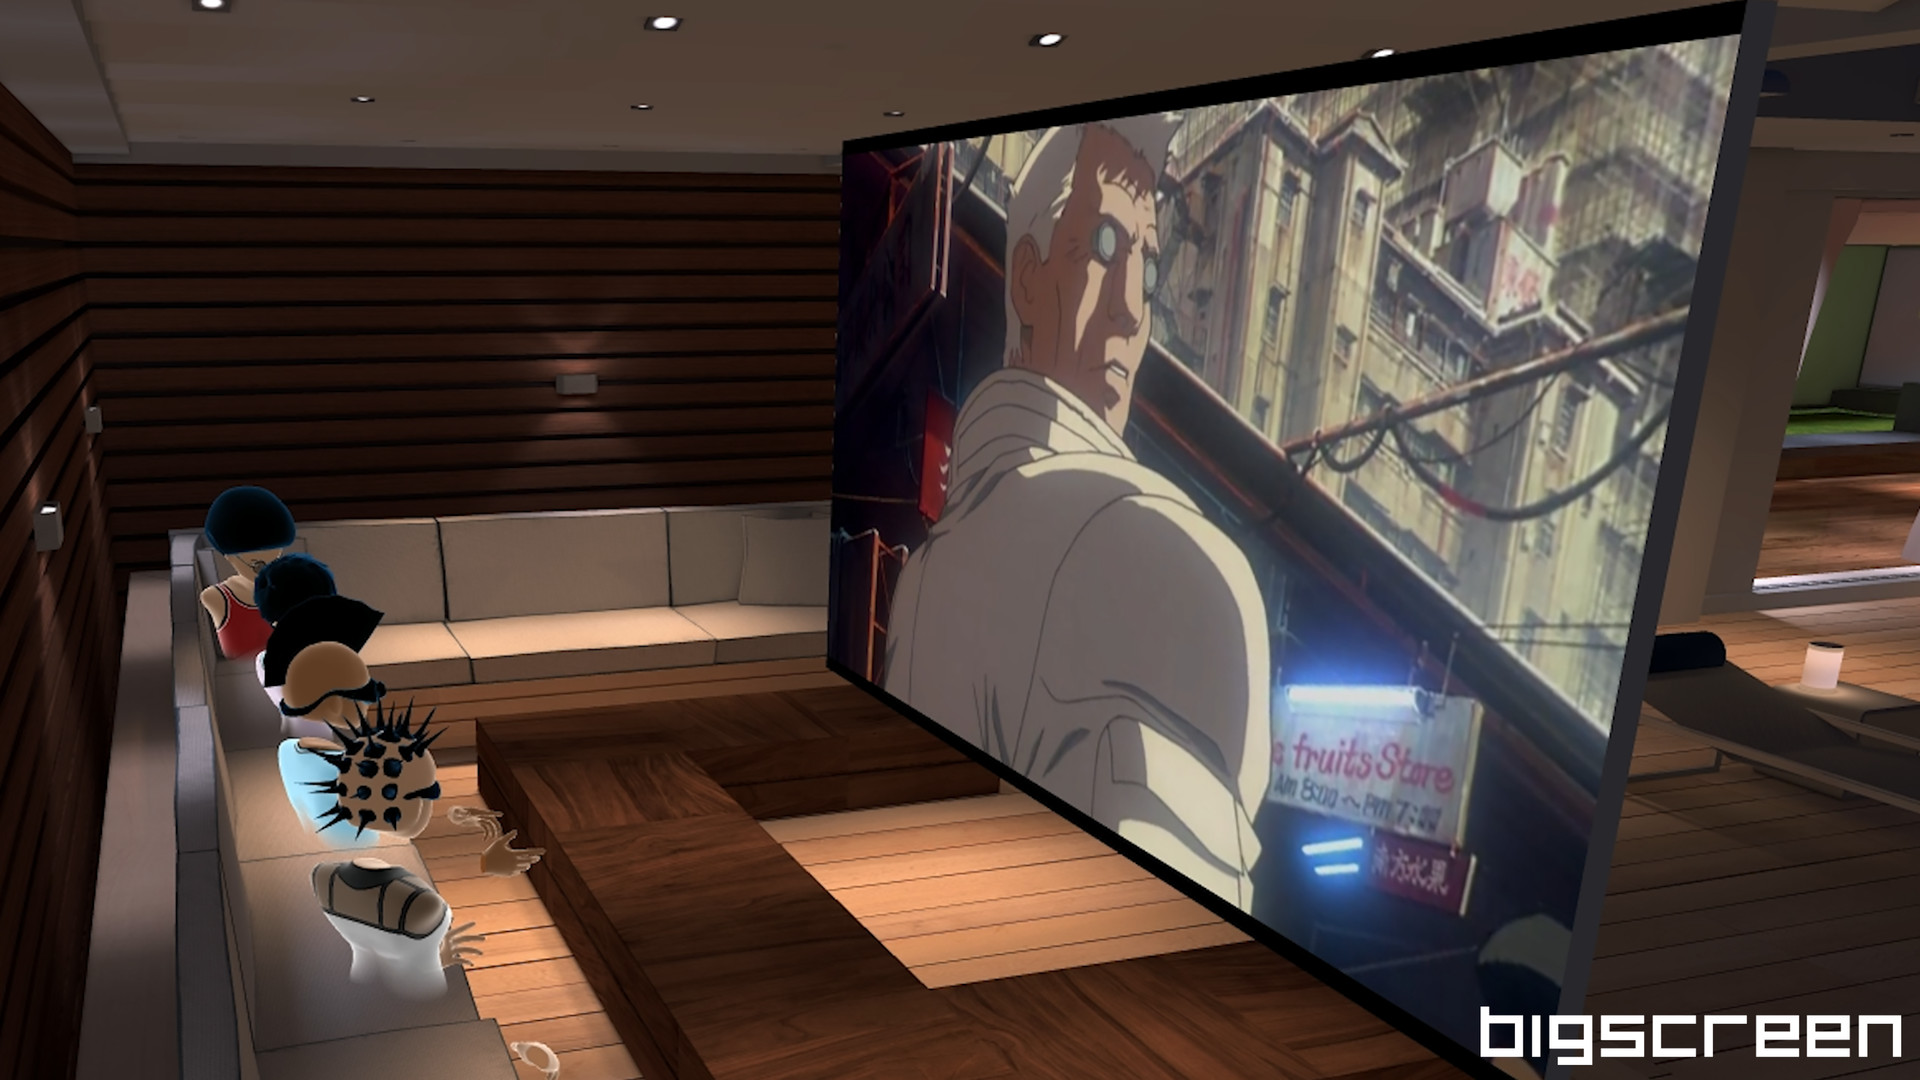 Bigscreen' Overhaul to Bring "massive features" Over Next 3 Months – Road VR